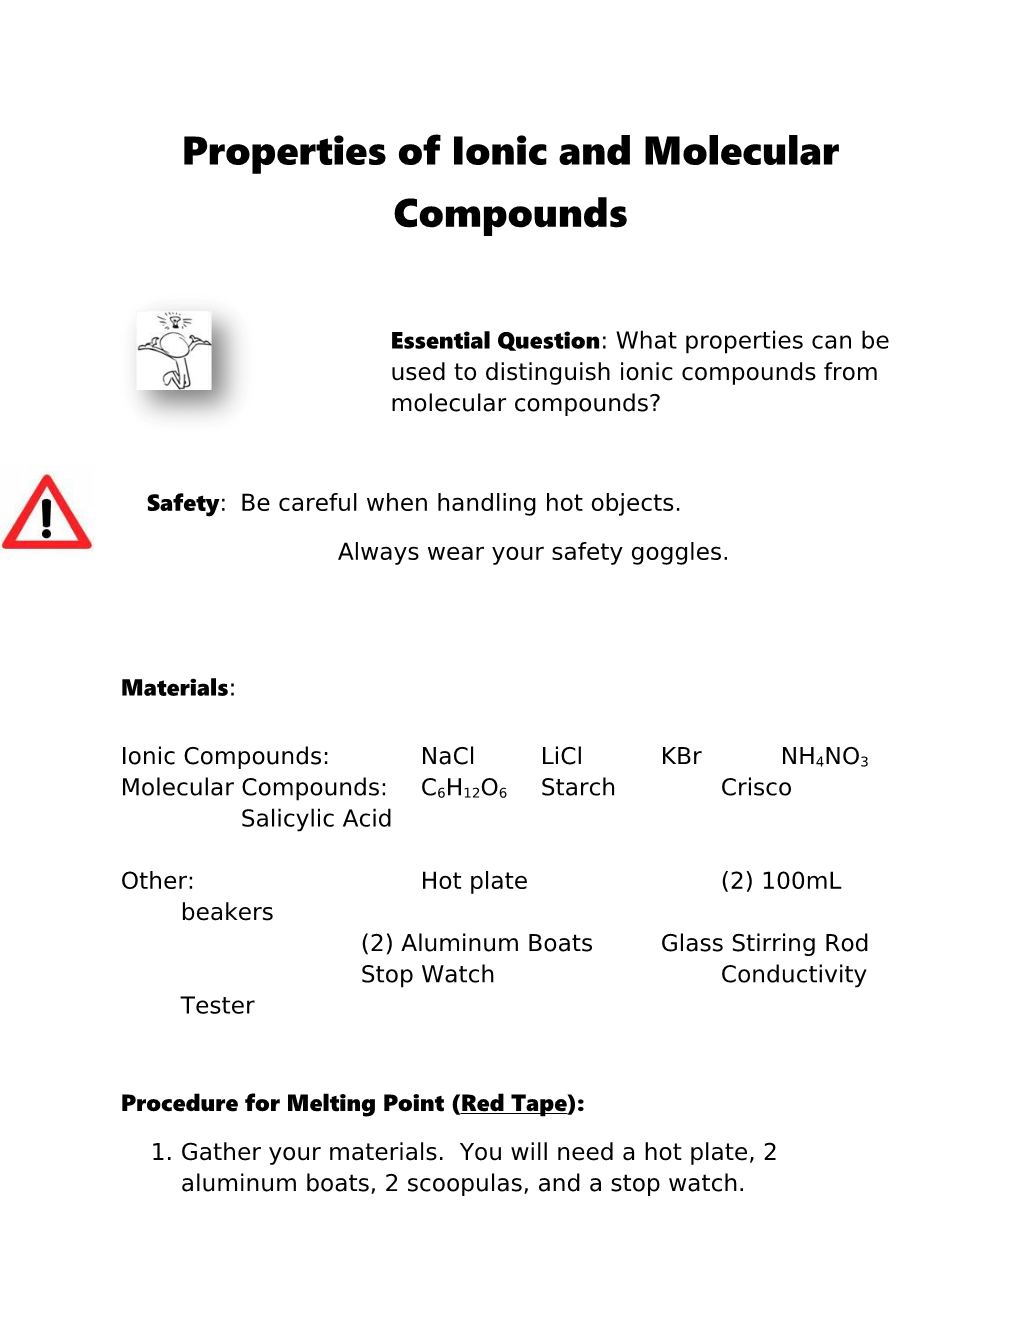 Properties of Ionic and Molecular Compounds